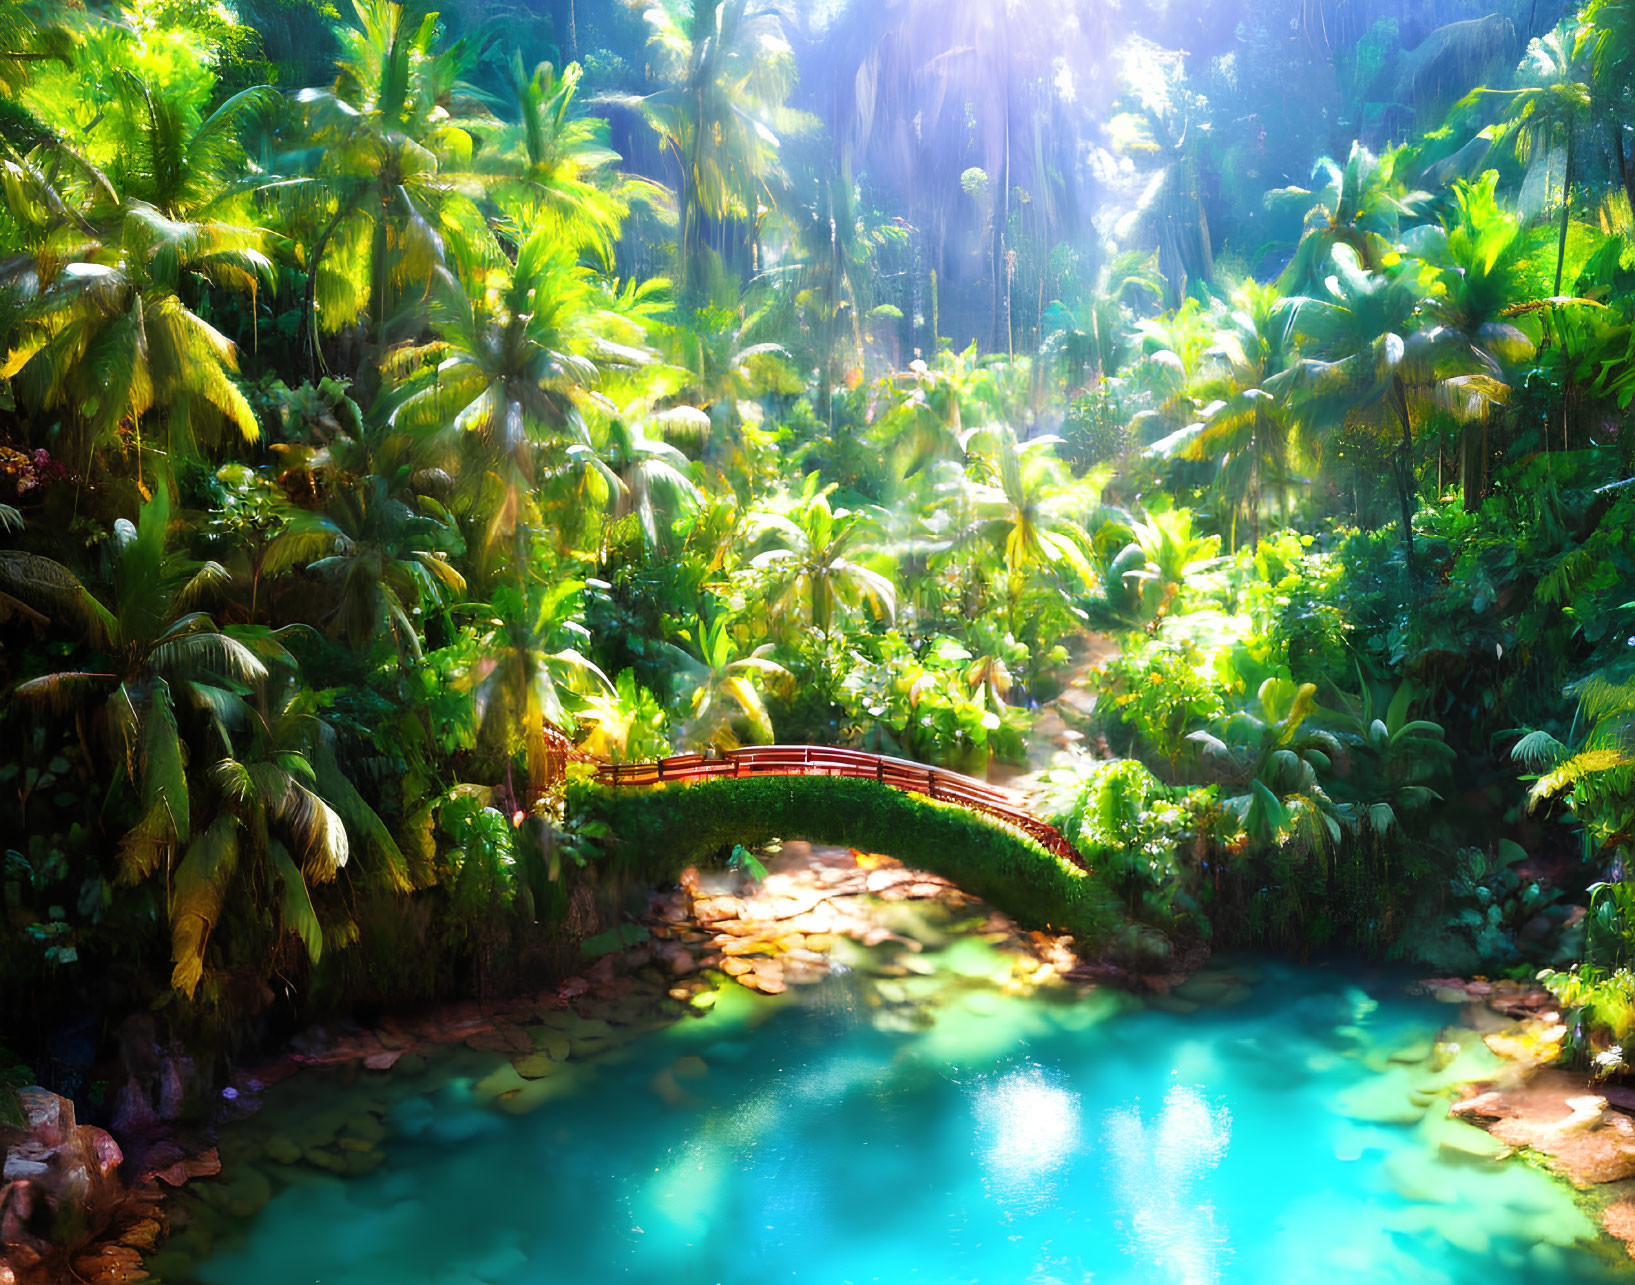 Tranquil Tropical Jungle with Greenery, Pond, and Red Bridge